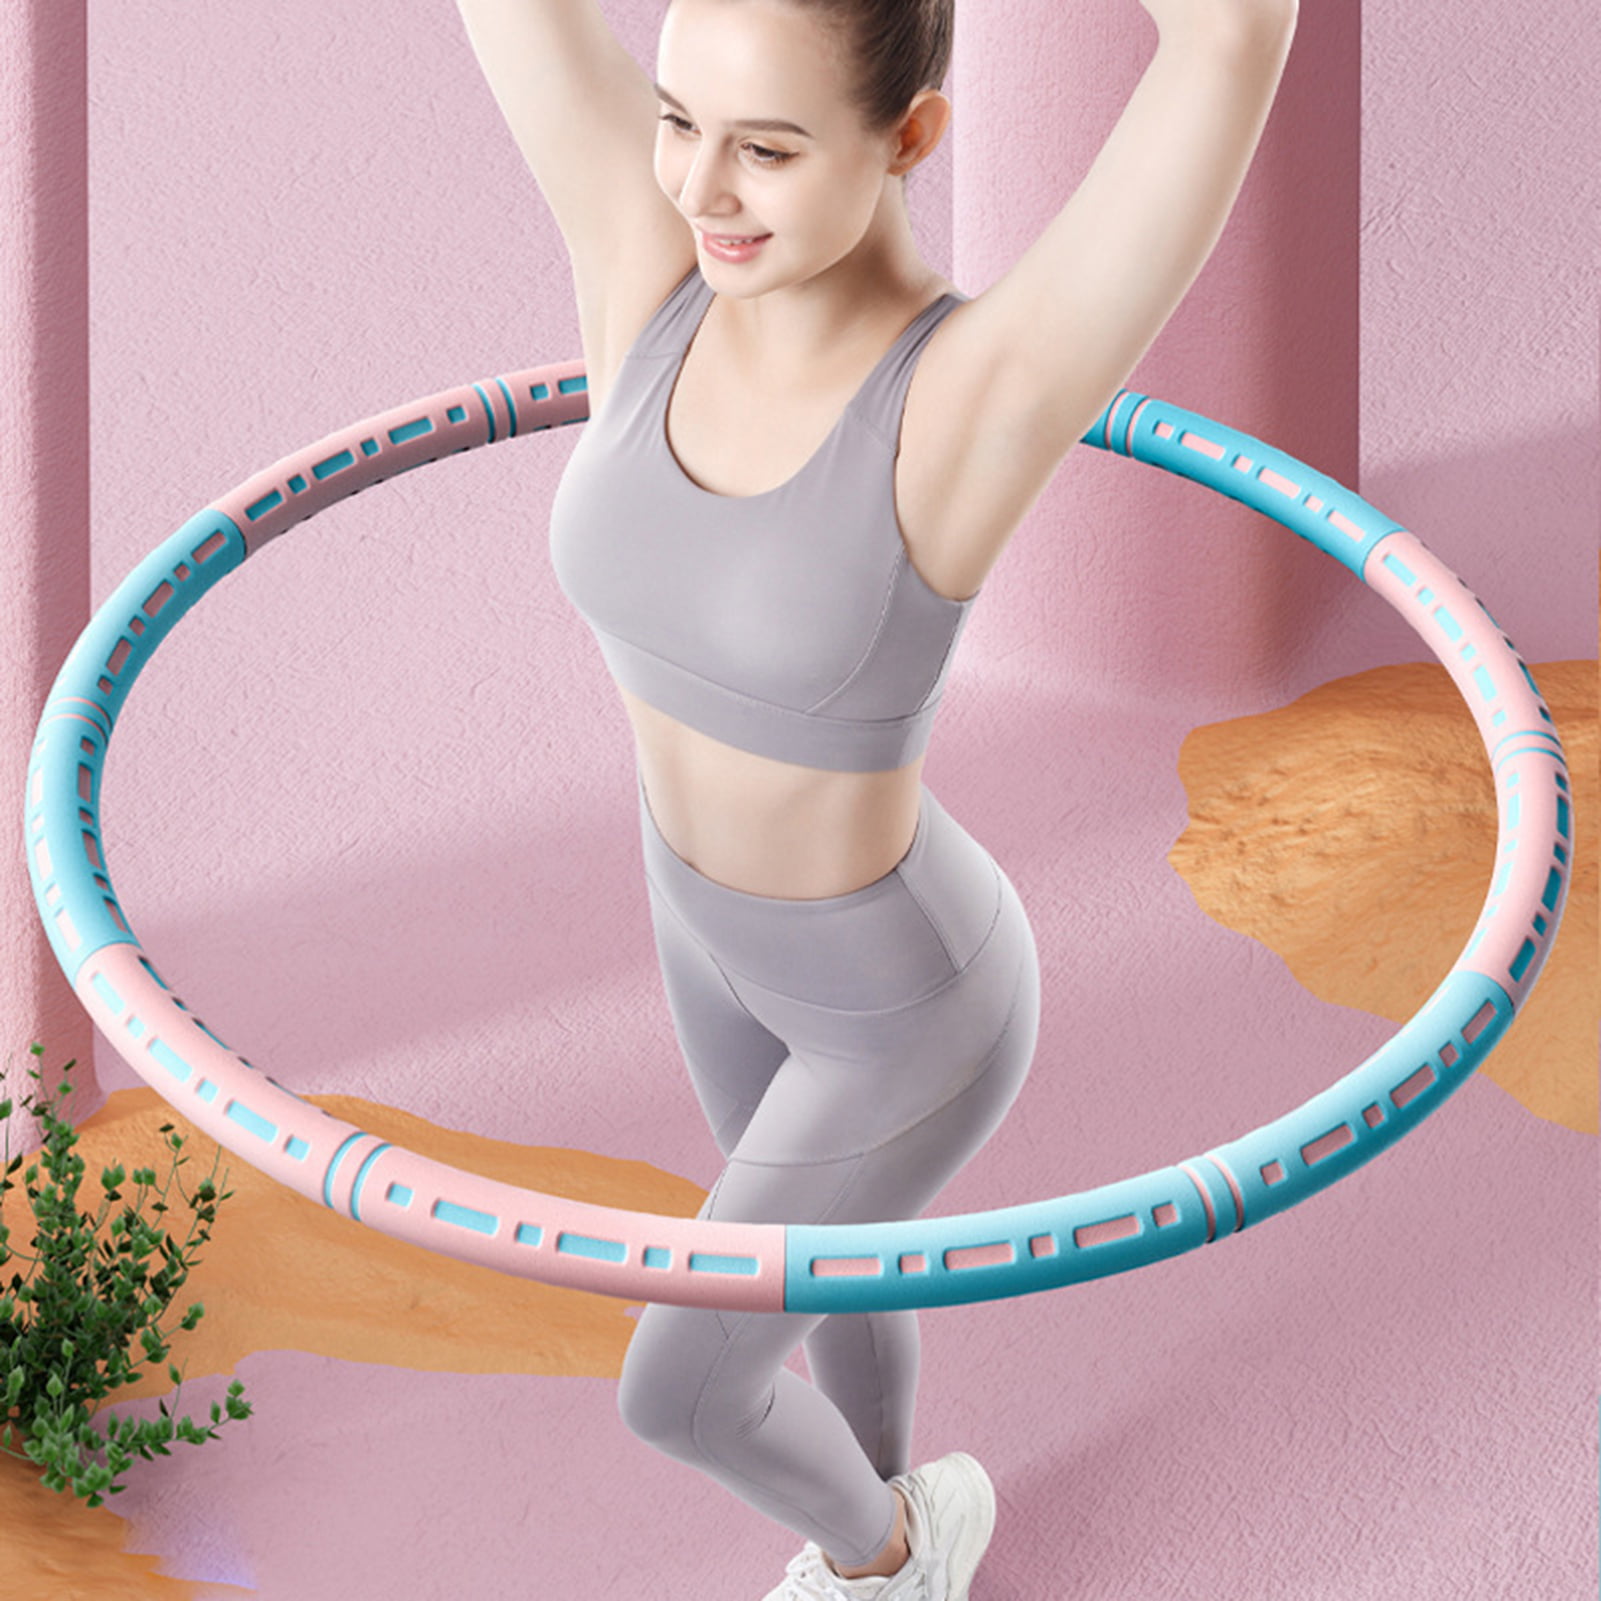 4x Large Hula Hoop Assorted Colour With High Quality Plastic Gym Exercise 55Cm 